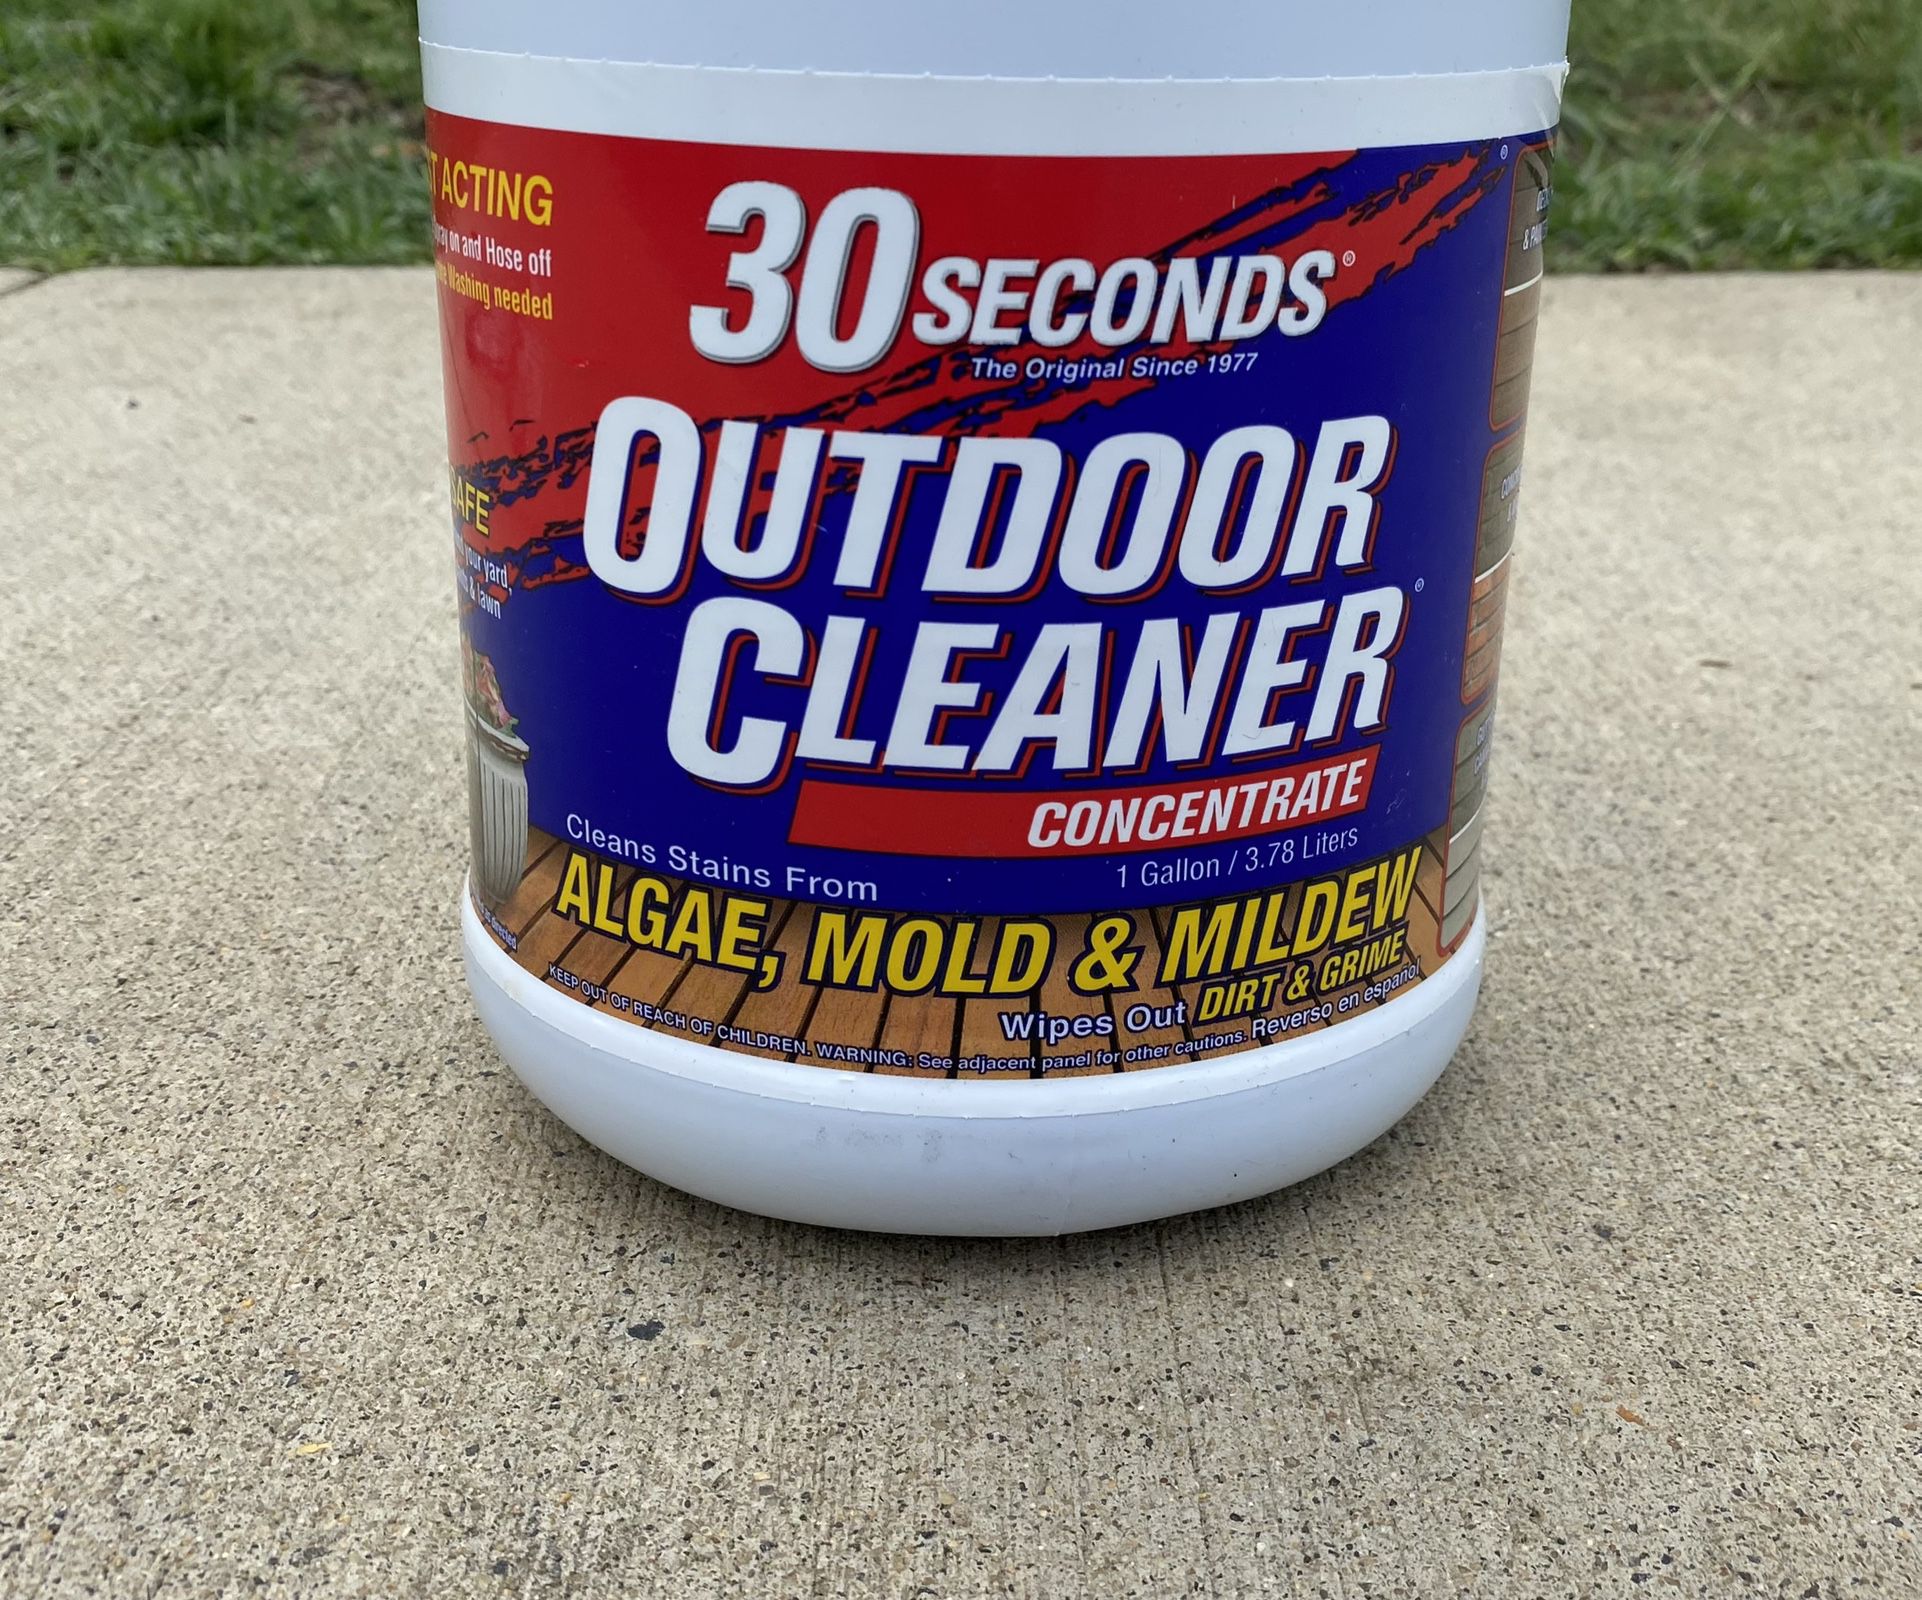  30 Seconds Outdoor Cleaner Concentrate Cleans Stains From Algae Mold & Mildew 1 Gallon ~ New